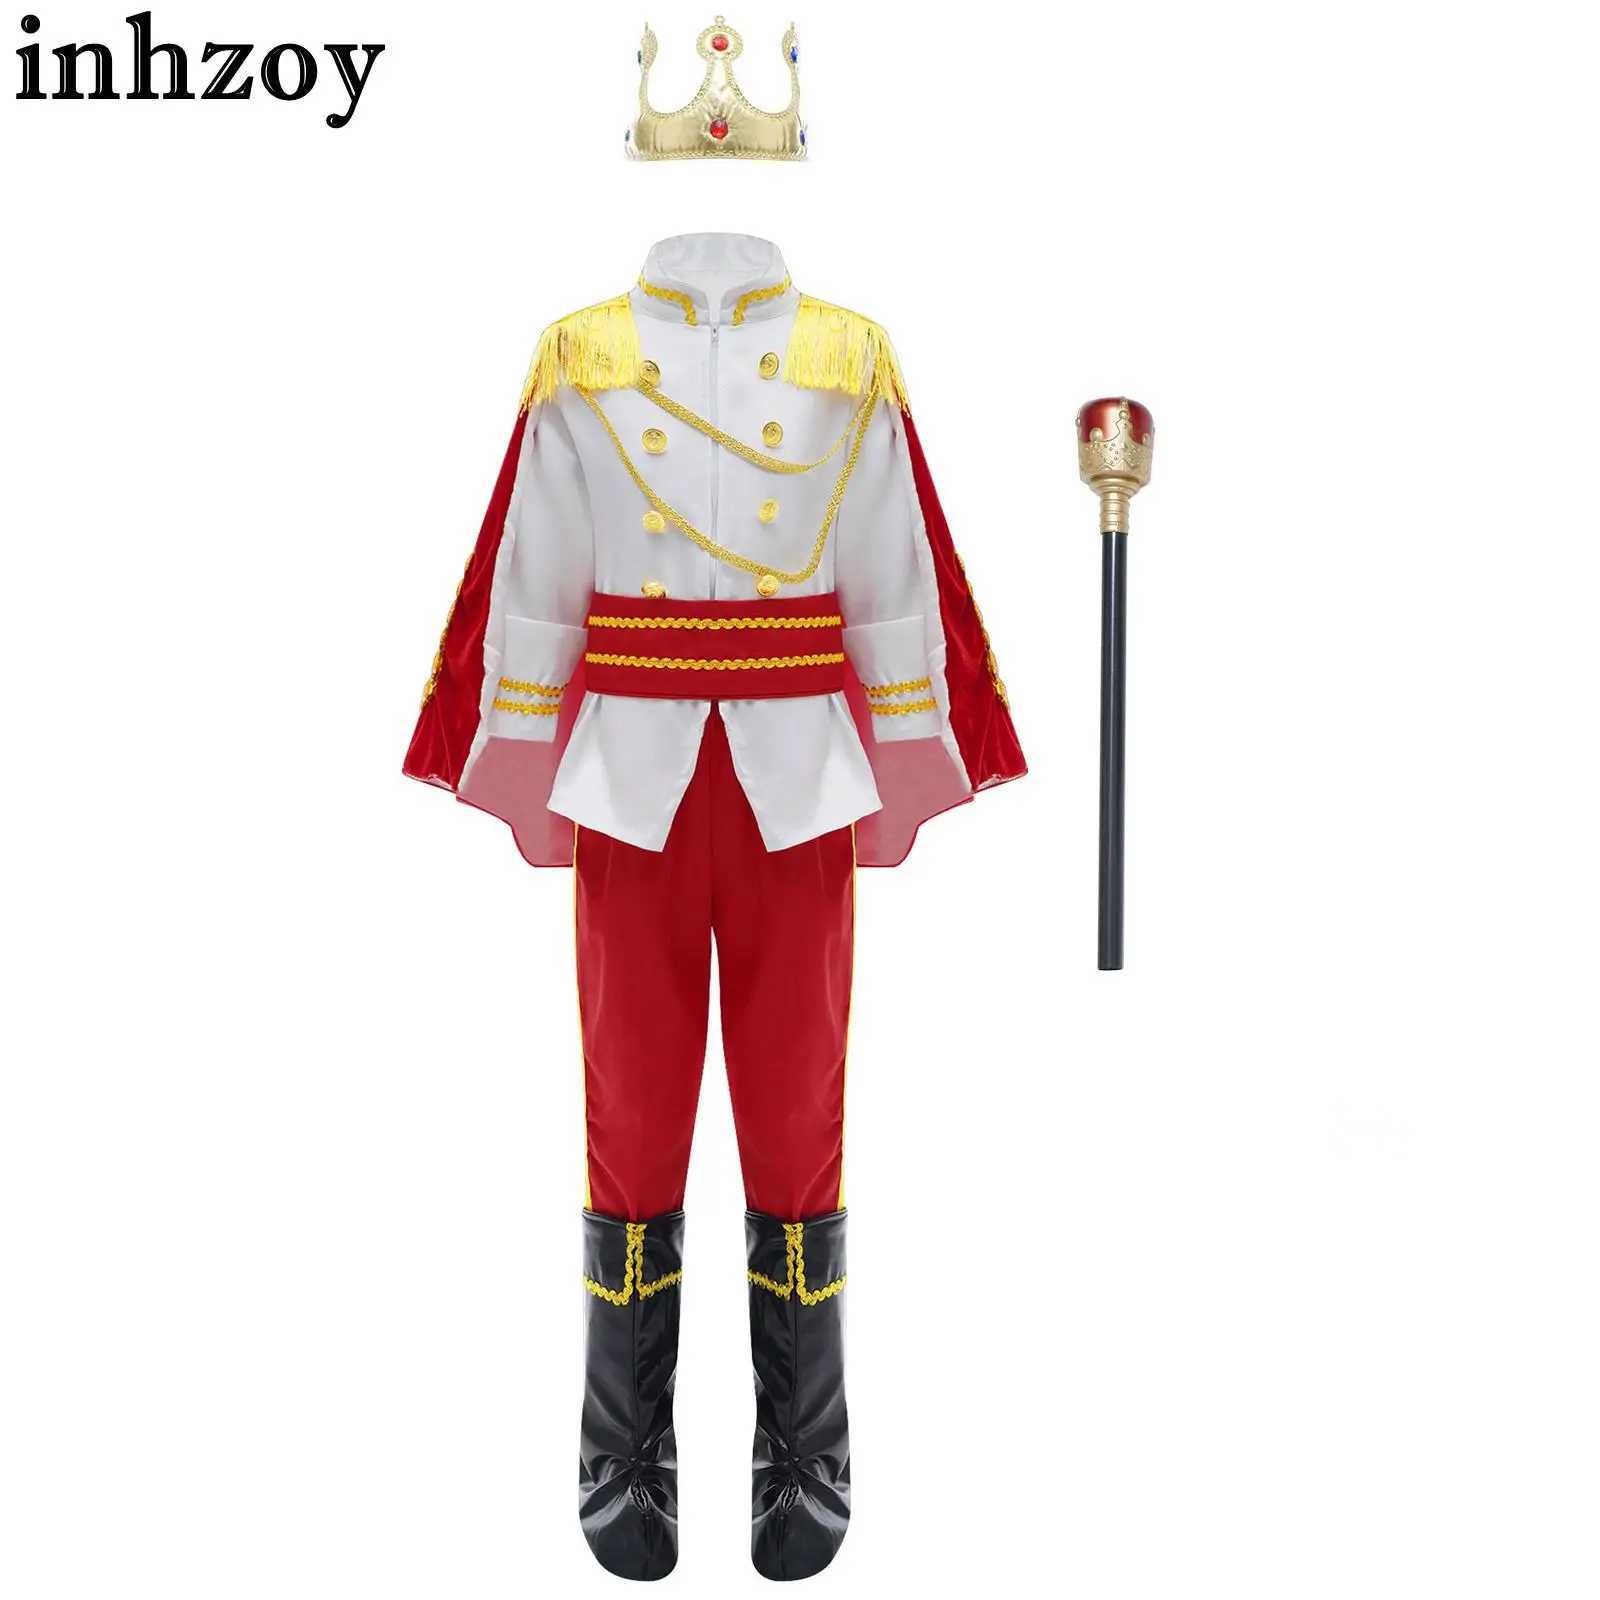 Cosplay Boys Prince King Cosplay Costume Halloween Outfit zip-up stack stack